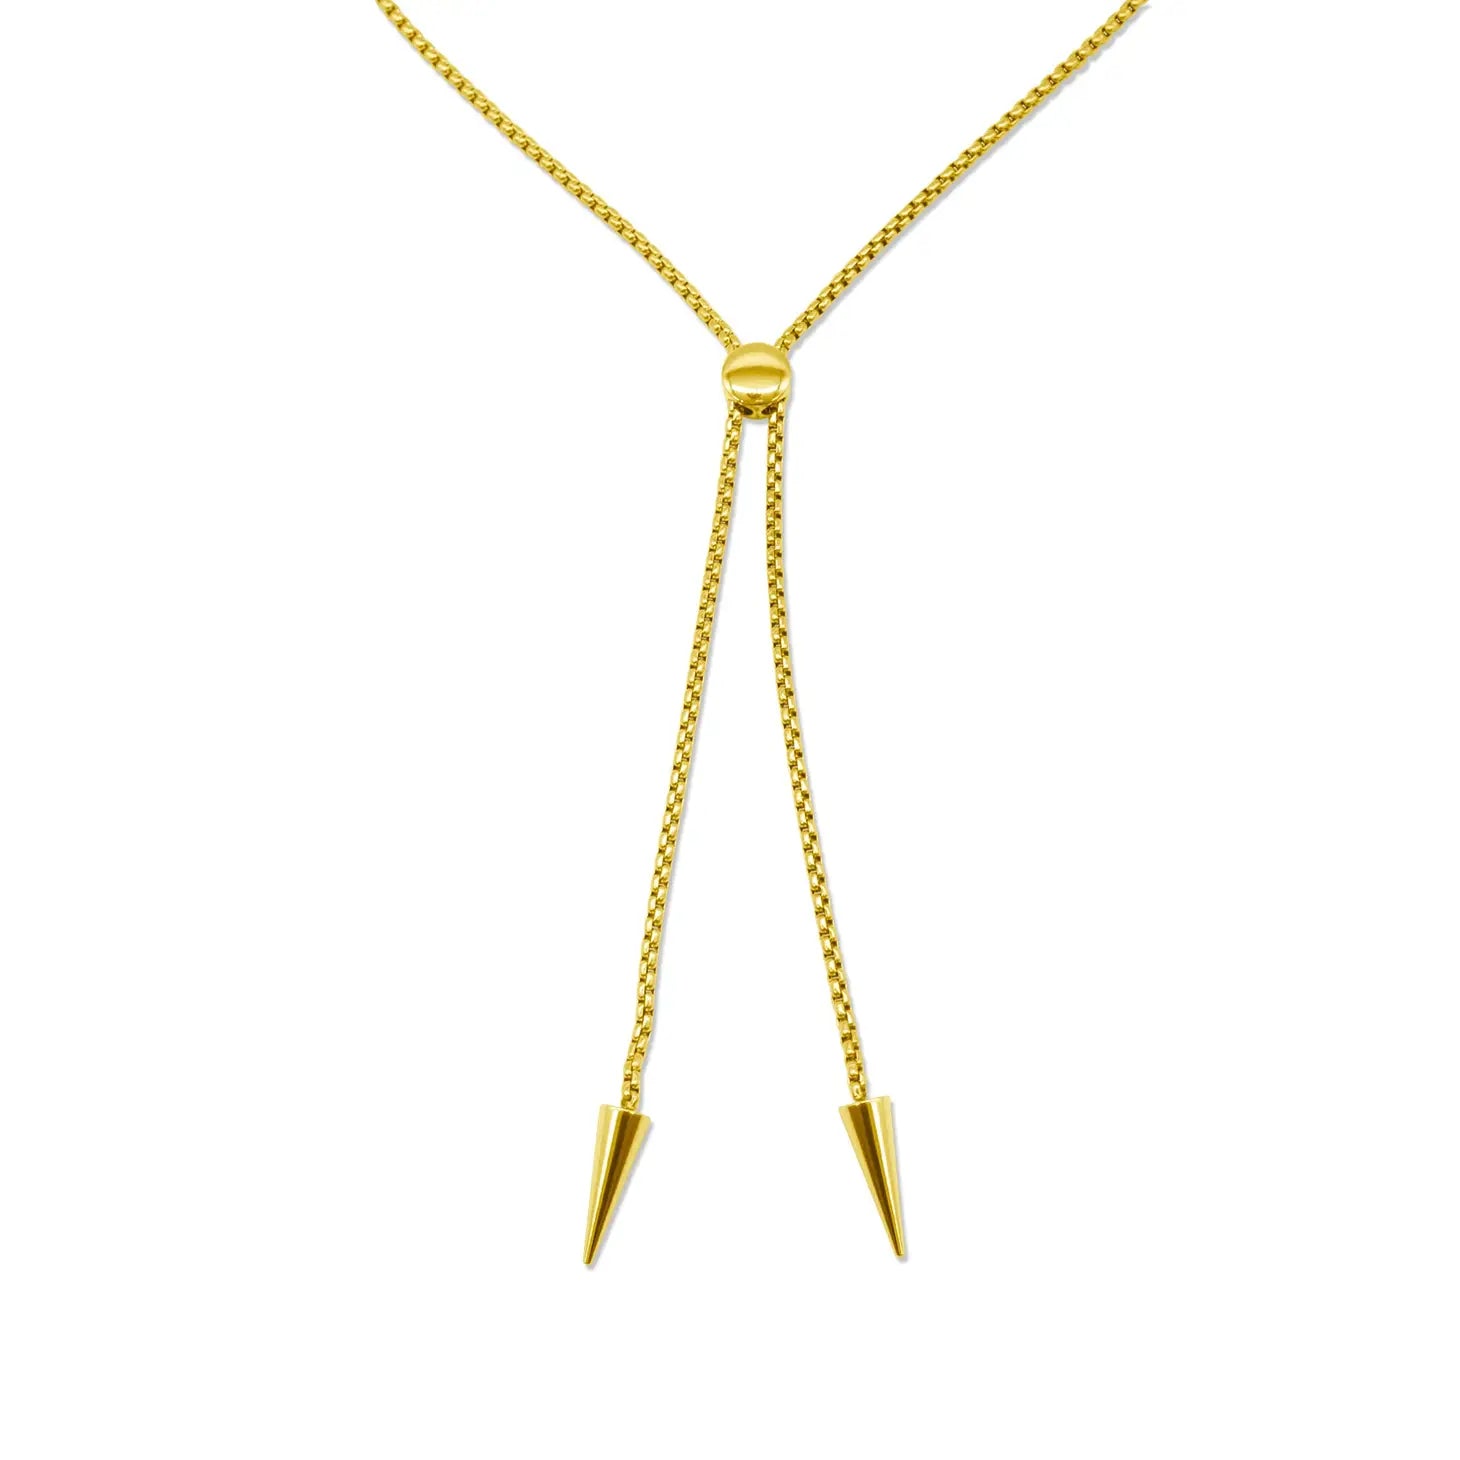 Gold metal bolo tie with matching metal box chain, small round slide, and spike tips. Shown flat